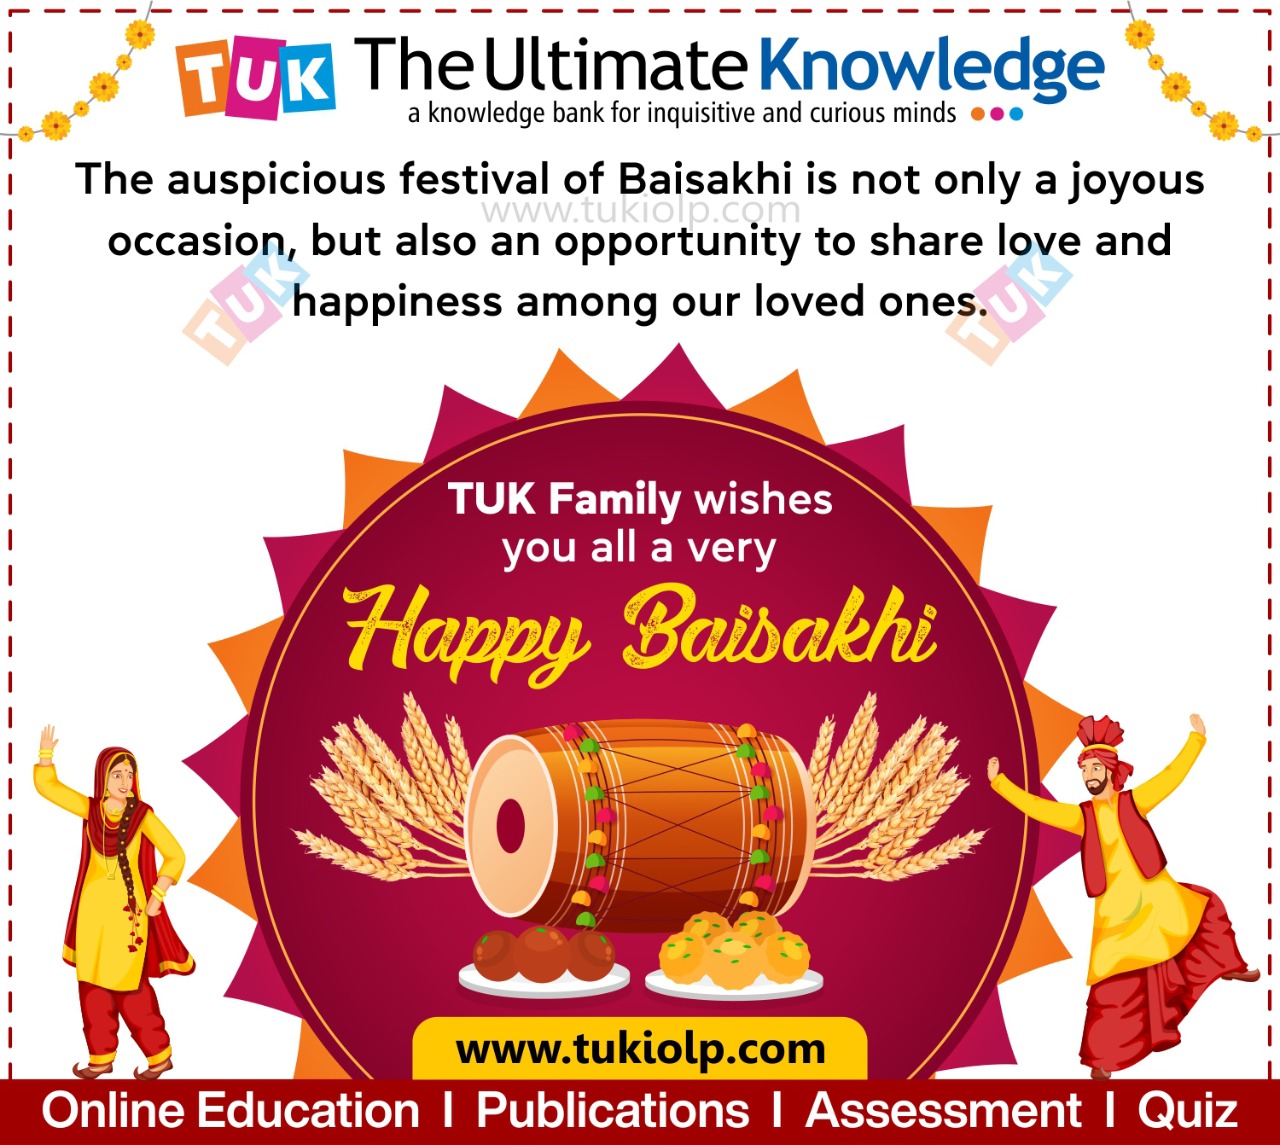 pr ———— —————————————————————————————— —,

+ TMA The Ultimate Knowledge

a knowledge bank for inquisitive and curious minds eee

The auspicious festival of Baisakhi is not only a joyous
occasion, but also an opportunity to share love and
happiness among our loved ones.

| |
| |
| |
| |
| |
| |
| |
| |
| |
| |
| |
| |
| |
TUK Family wishes
: you all a very |
| |
| |
| |
| |
| |
| |
| |
| |
| |
| |
| |
| |
| |

pS

Online Education | Publications | Assessment | Quiz